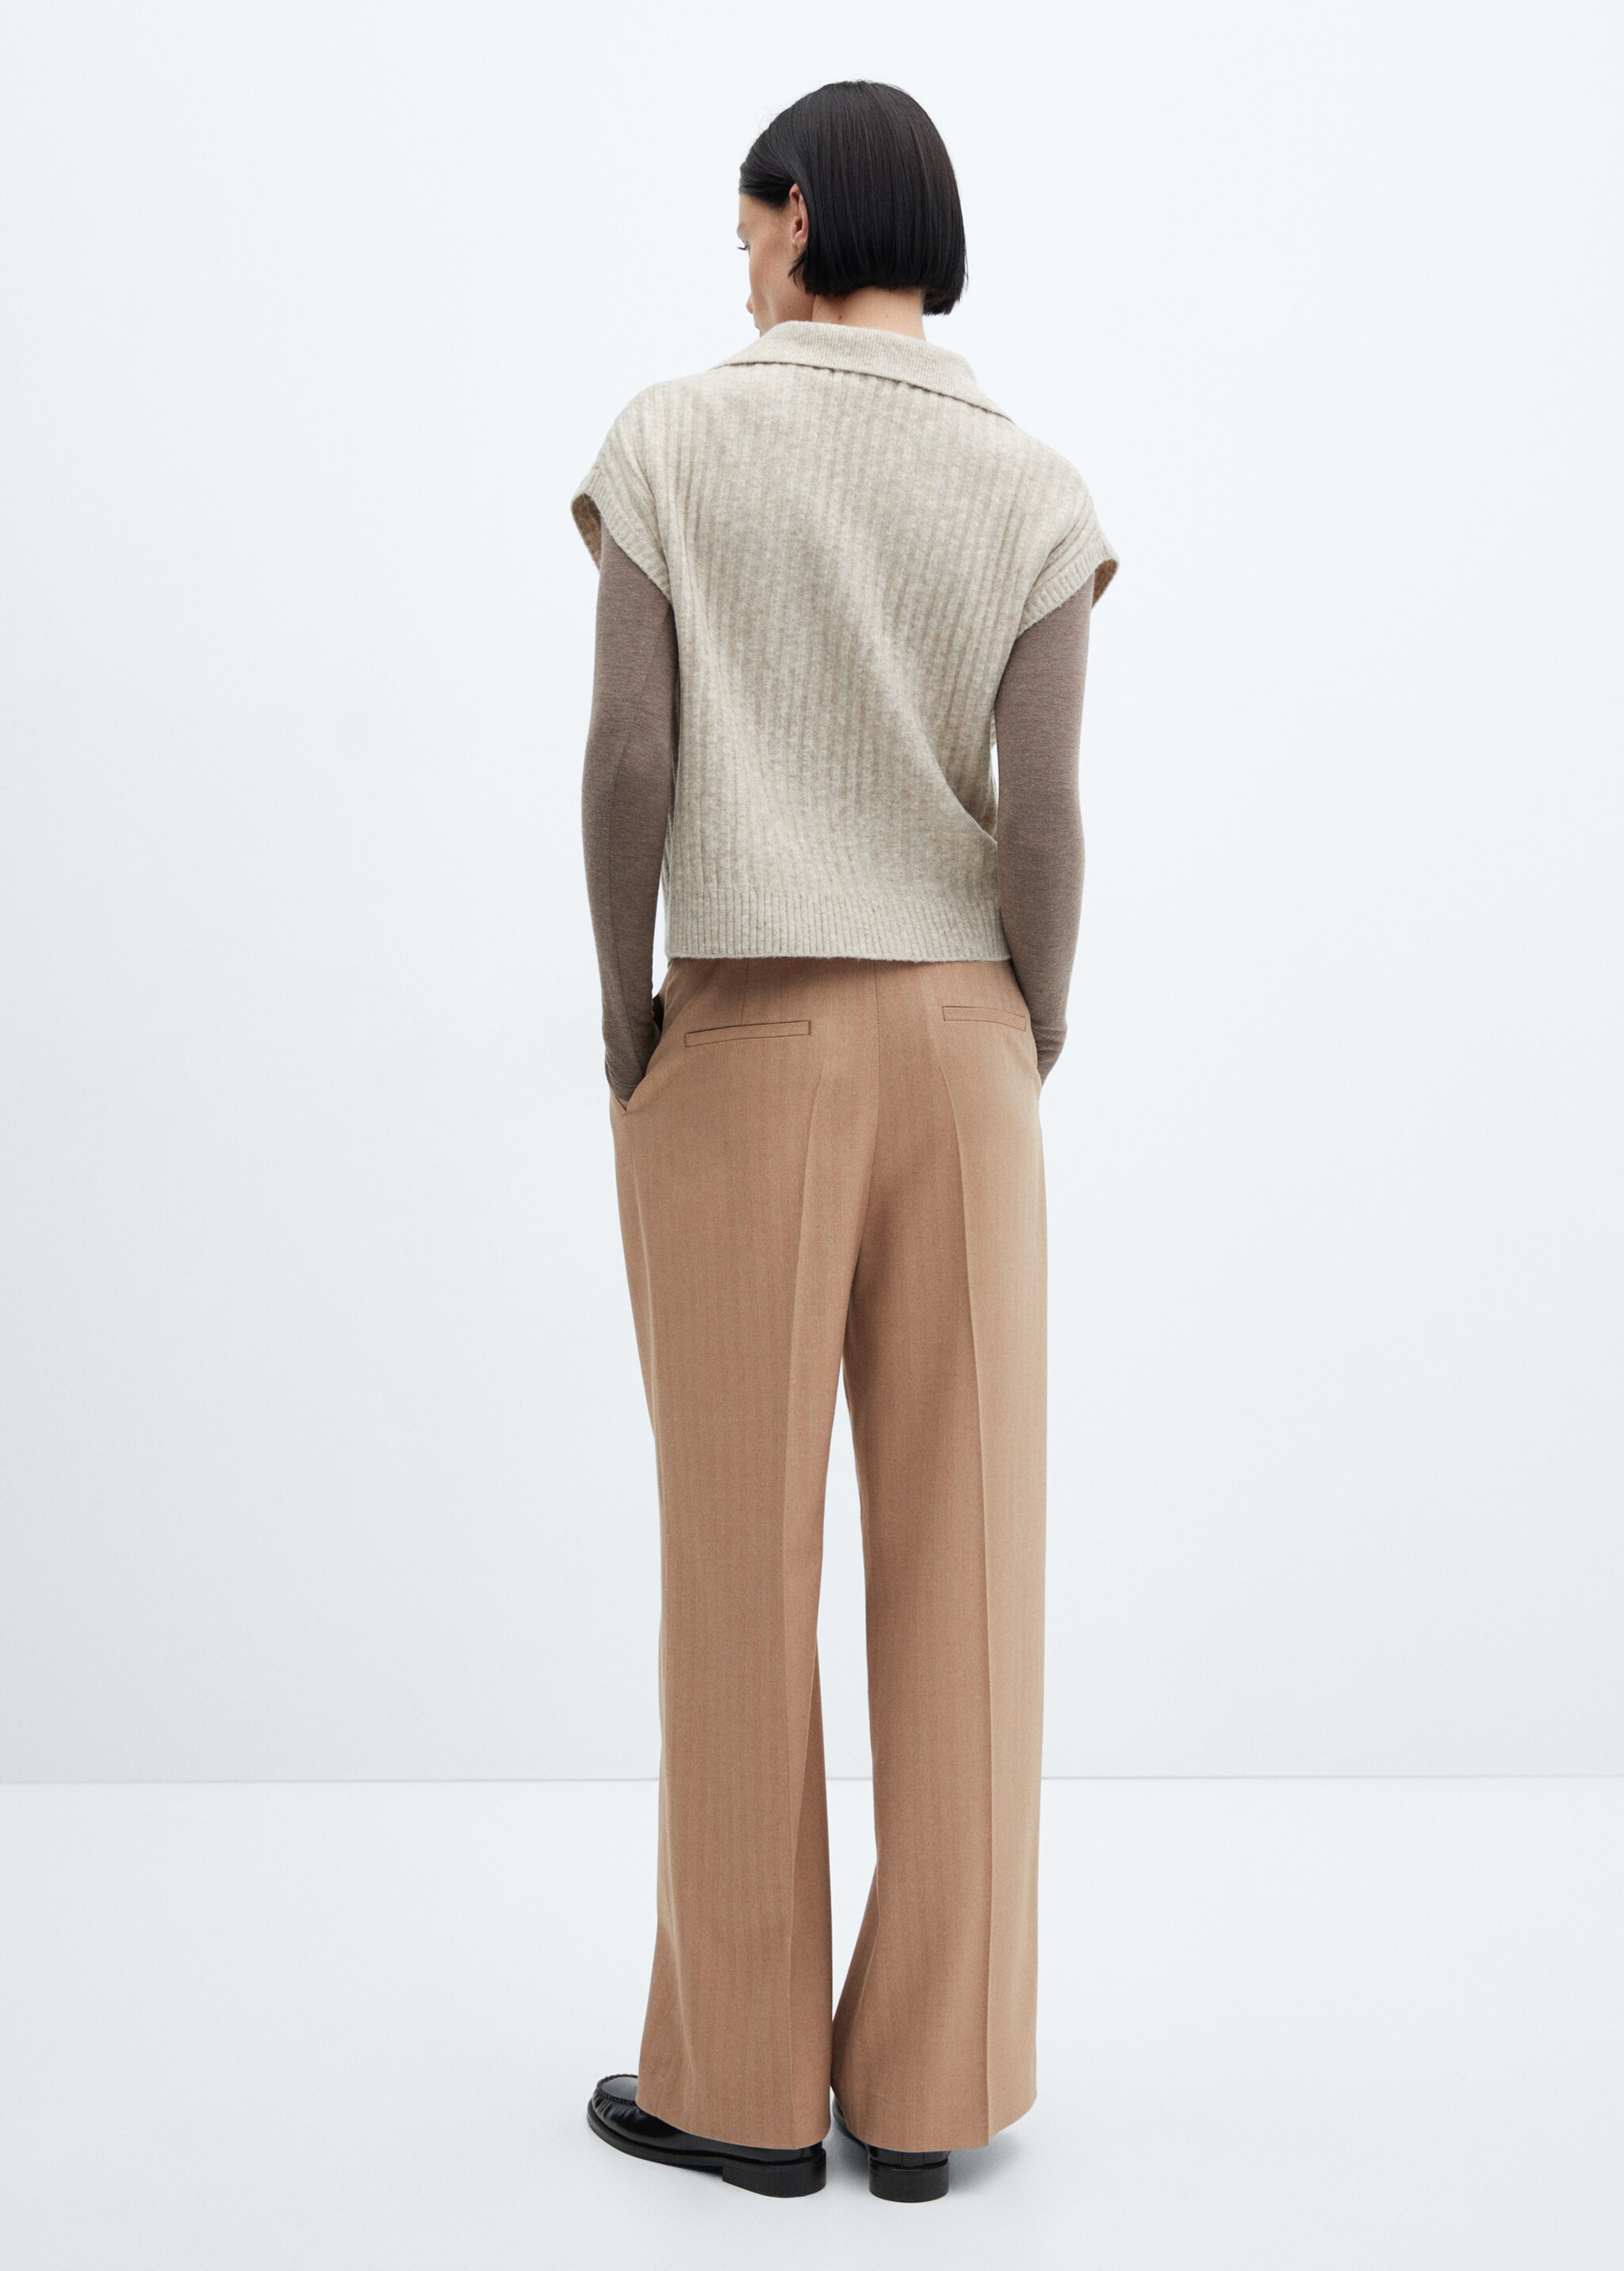 Chalk-stripe trousers - Reverse of the article